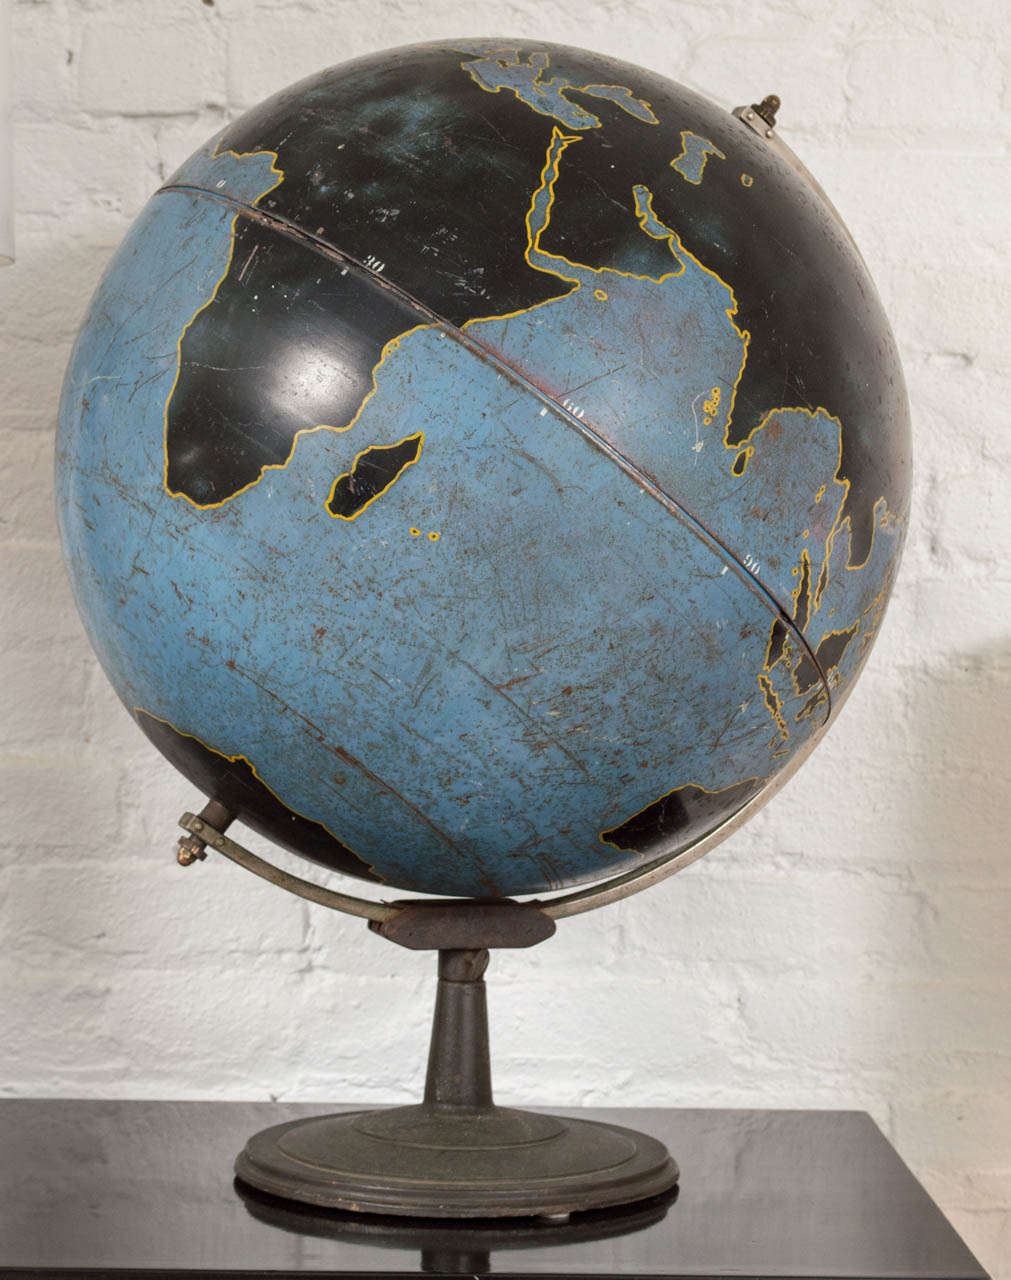 Industrial military aviation globe by Genoyer Geppert Co. Chicago IL.